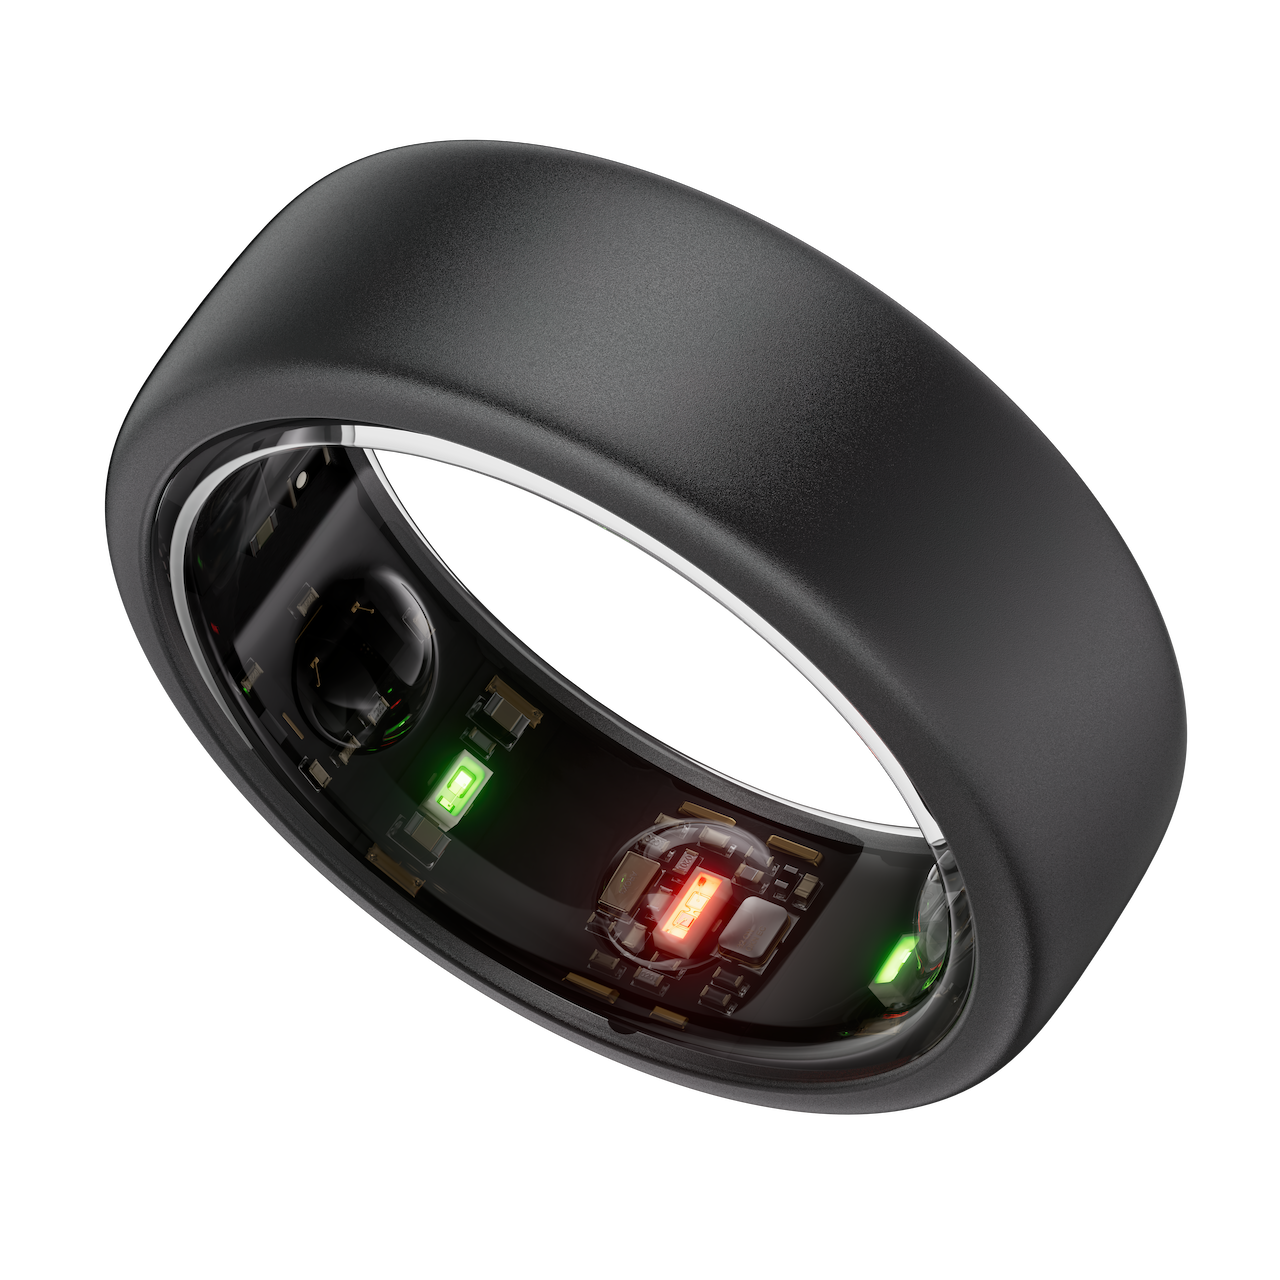 the stealth horizon model oura ring generation 3 viewed from an angle